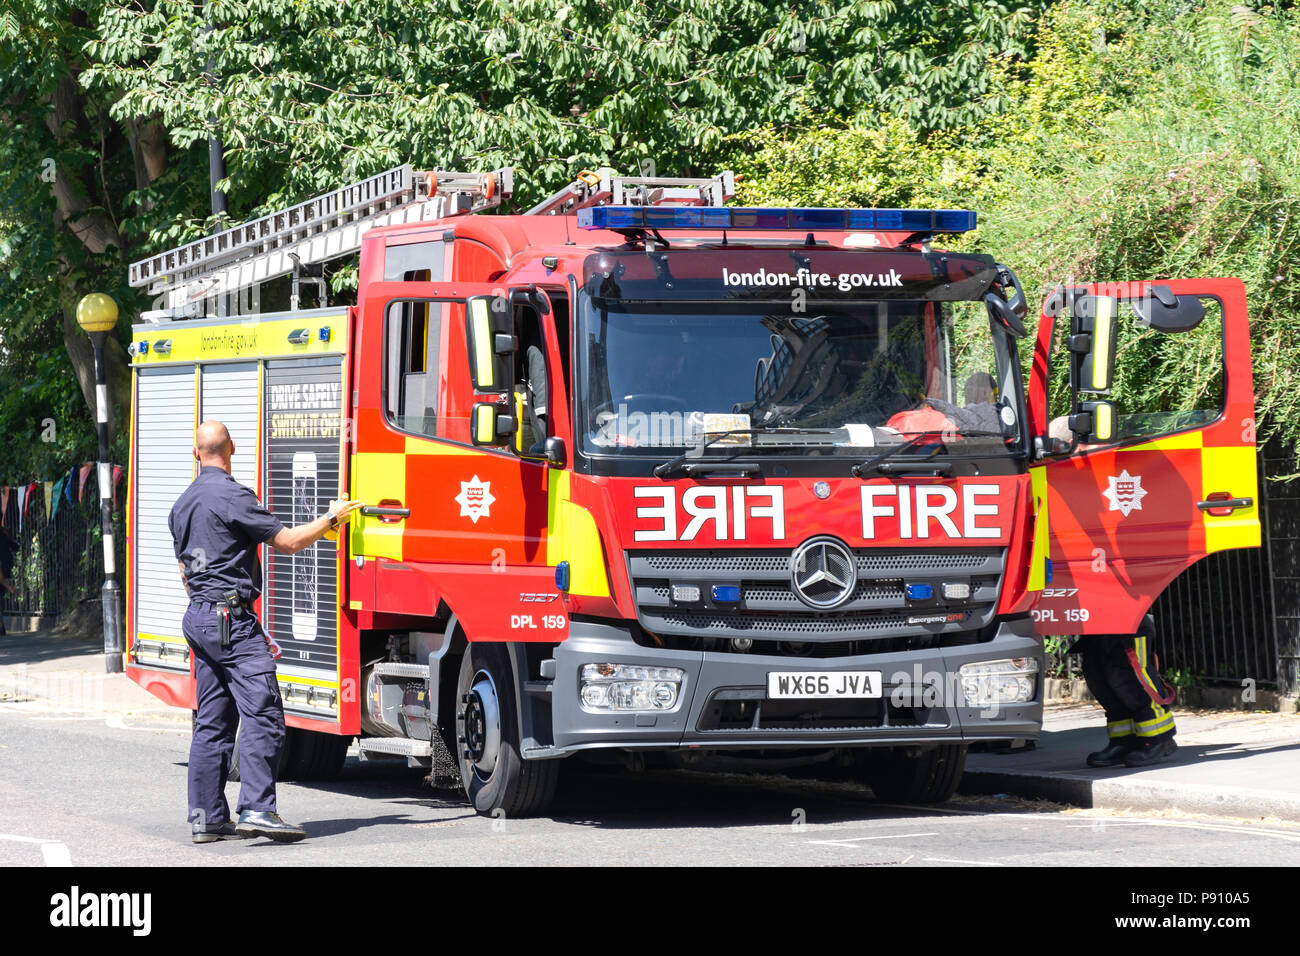 London Fire Brigade sur appel, Barbican, City of London, Greater London, Angleterre, Royaume-Uni Banque D'Images